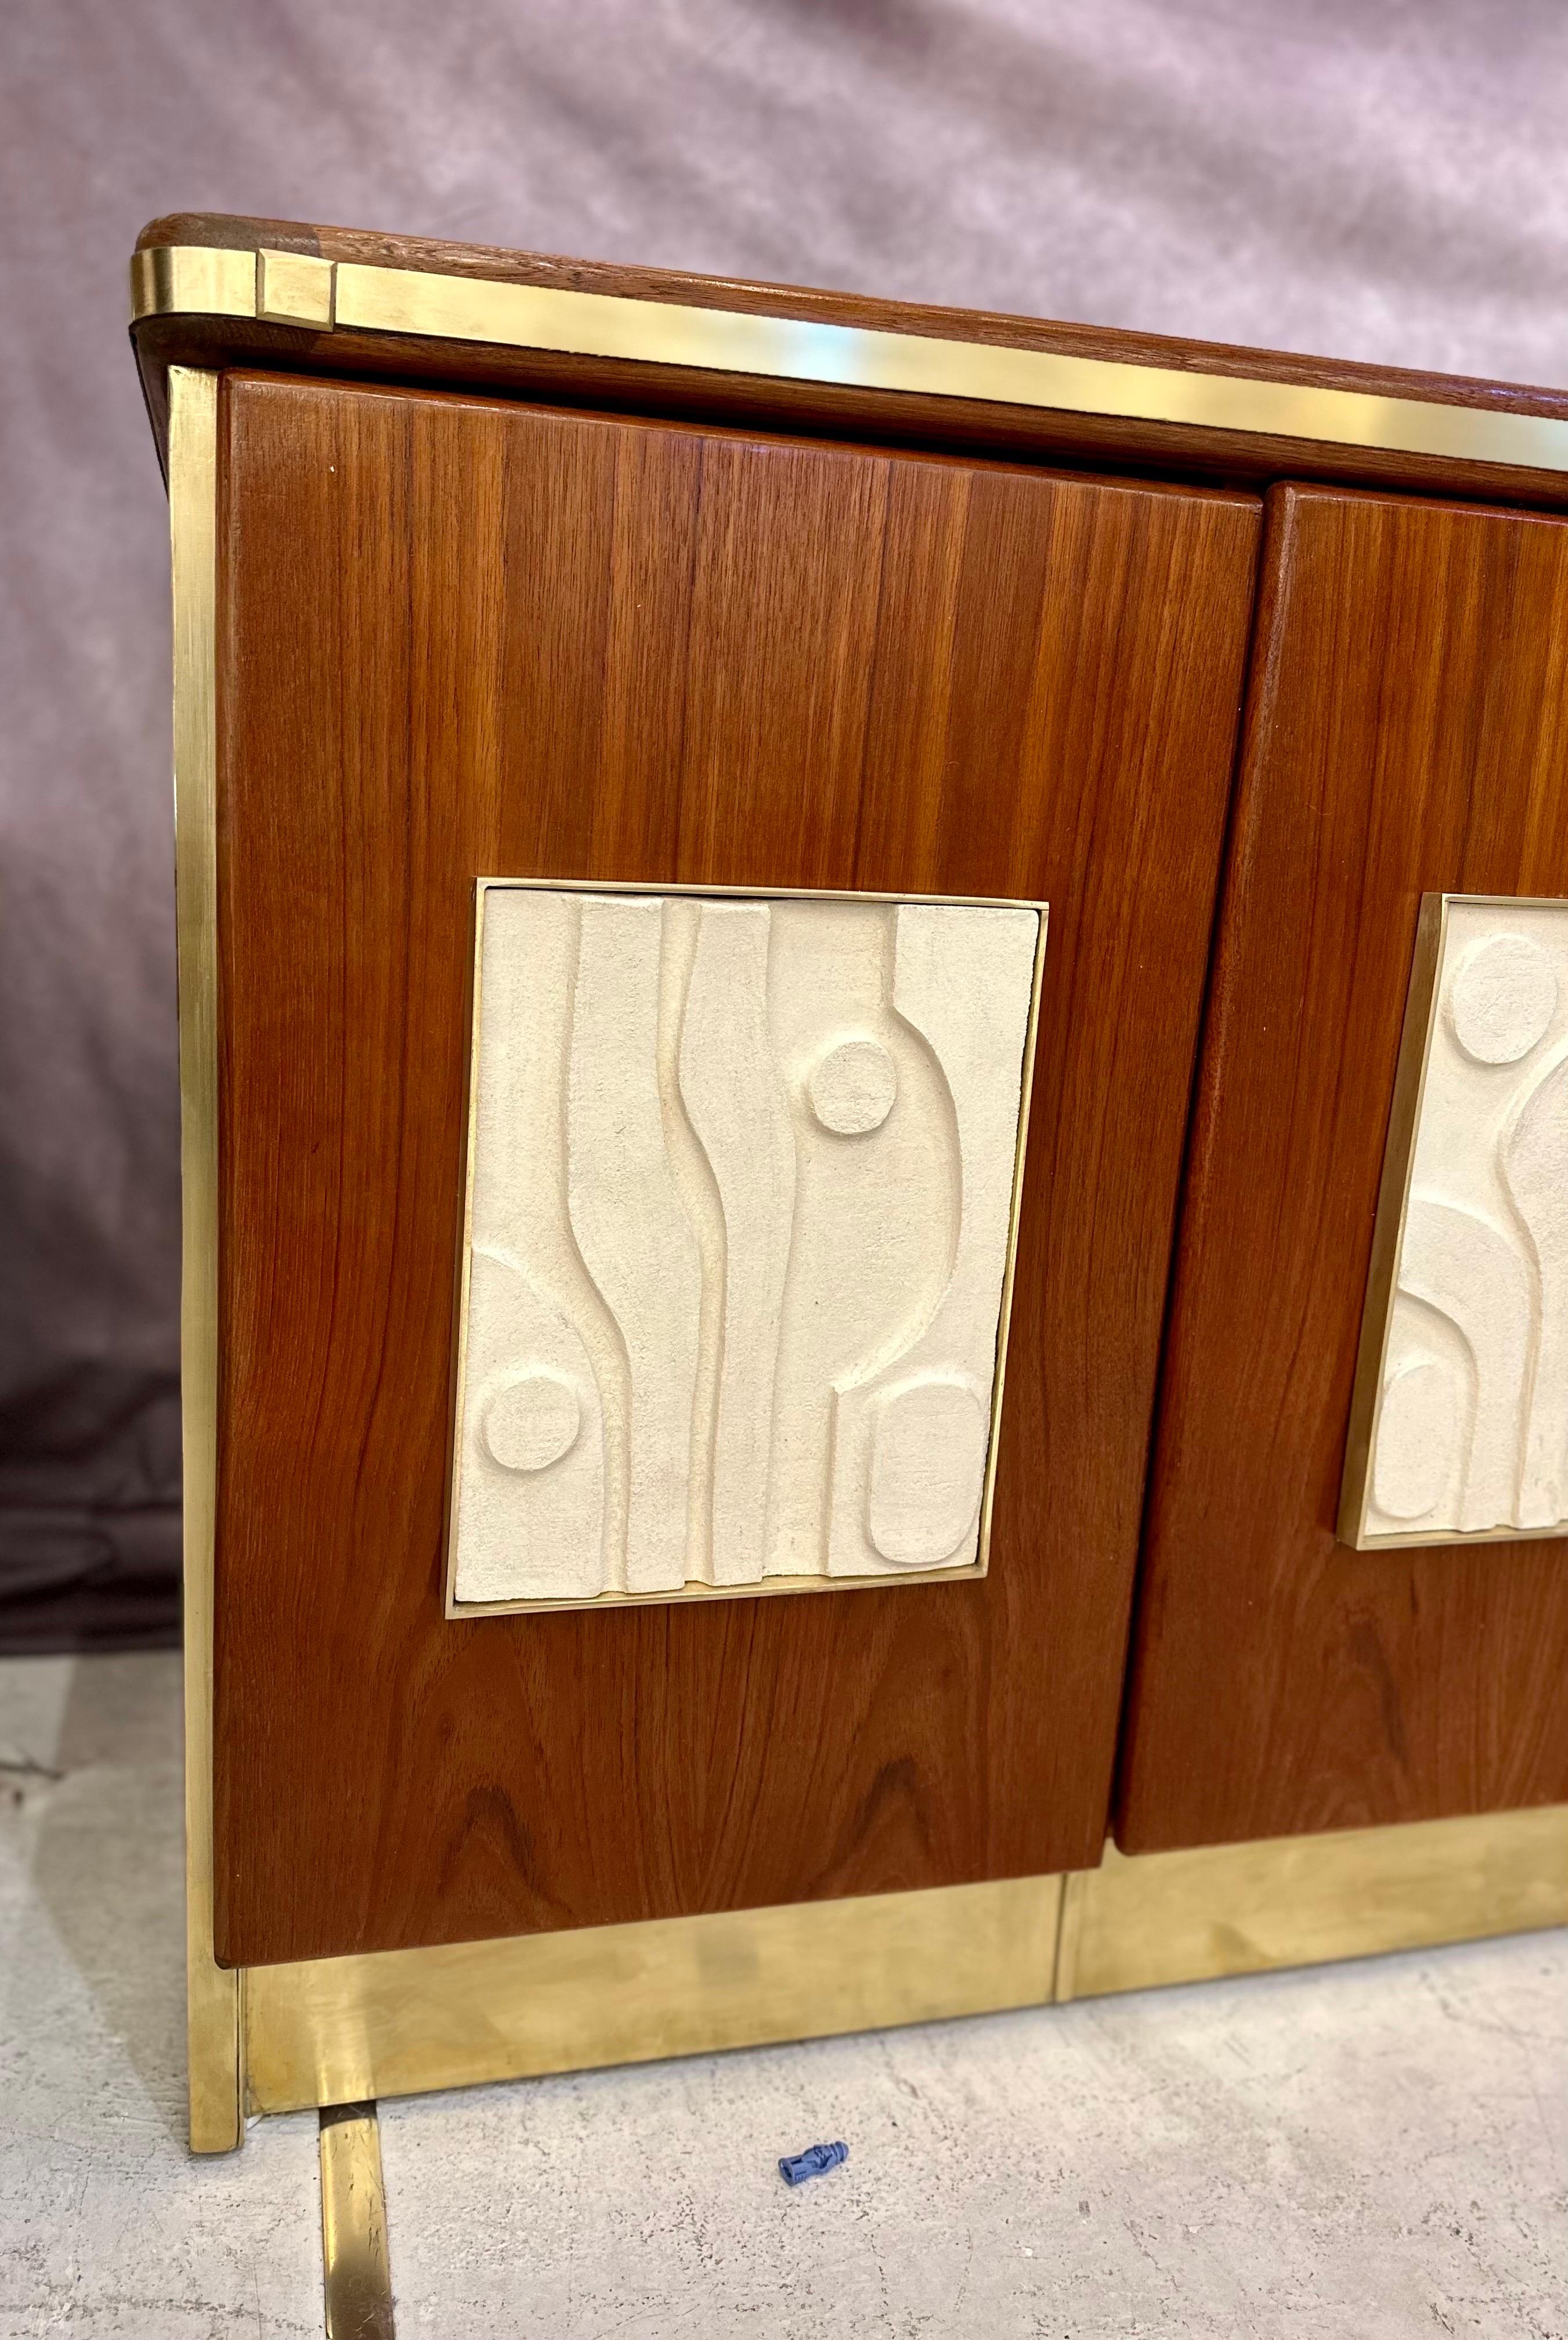 French Custom Made Artisanal Wood Credenza with handmade Ceramic Inclusions by Kat’s For Sale